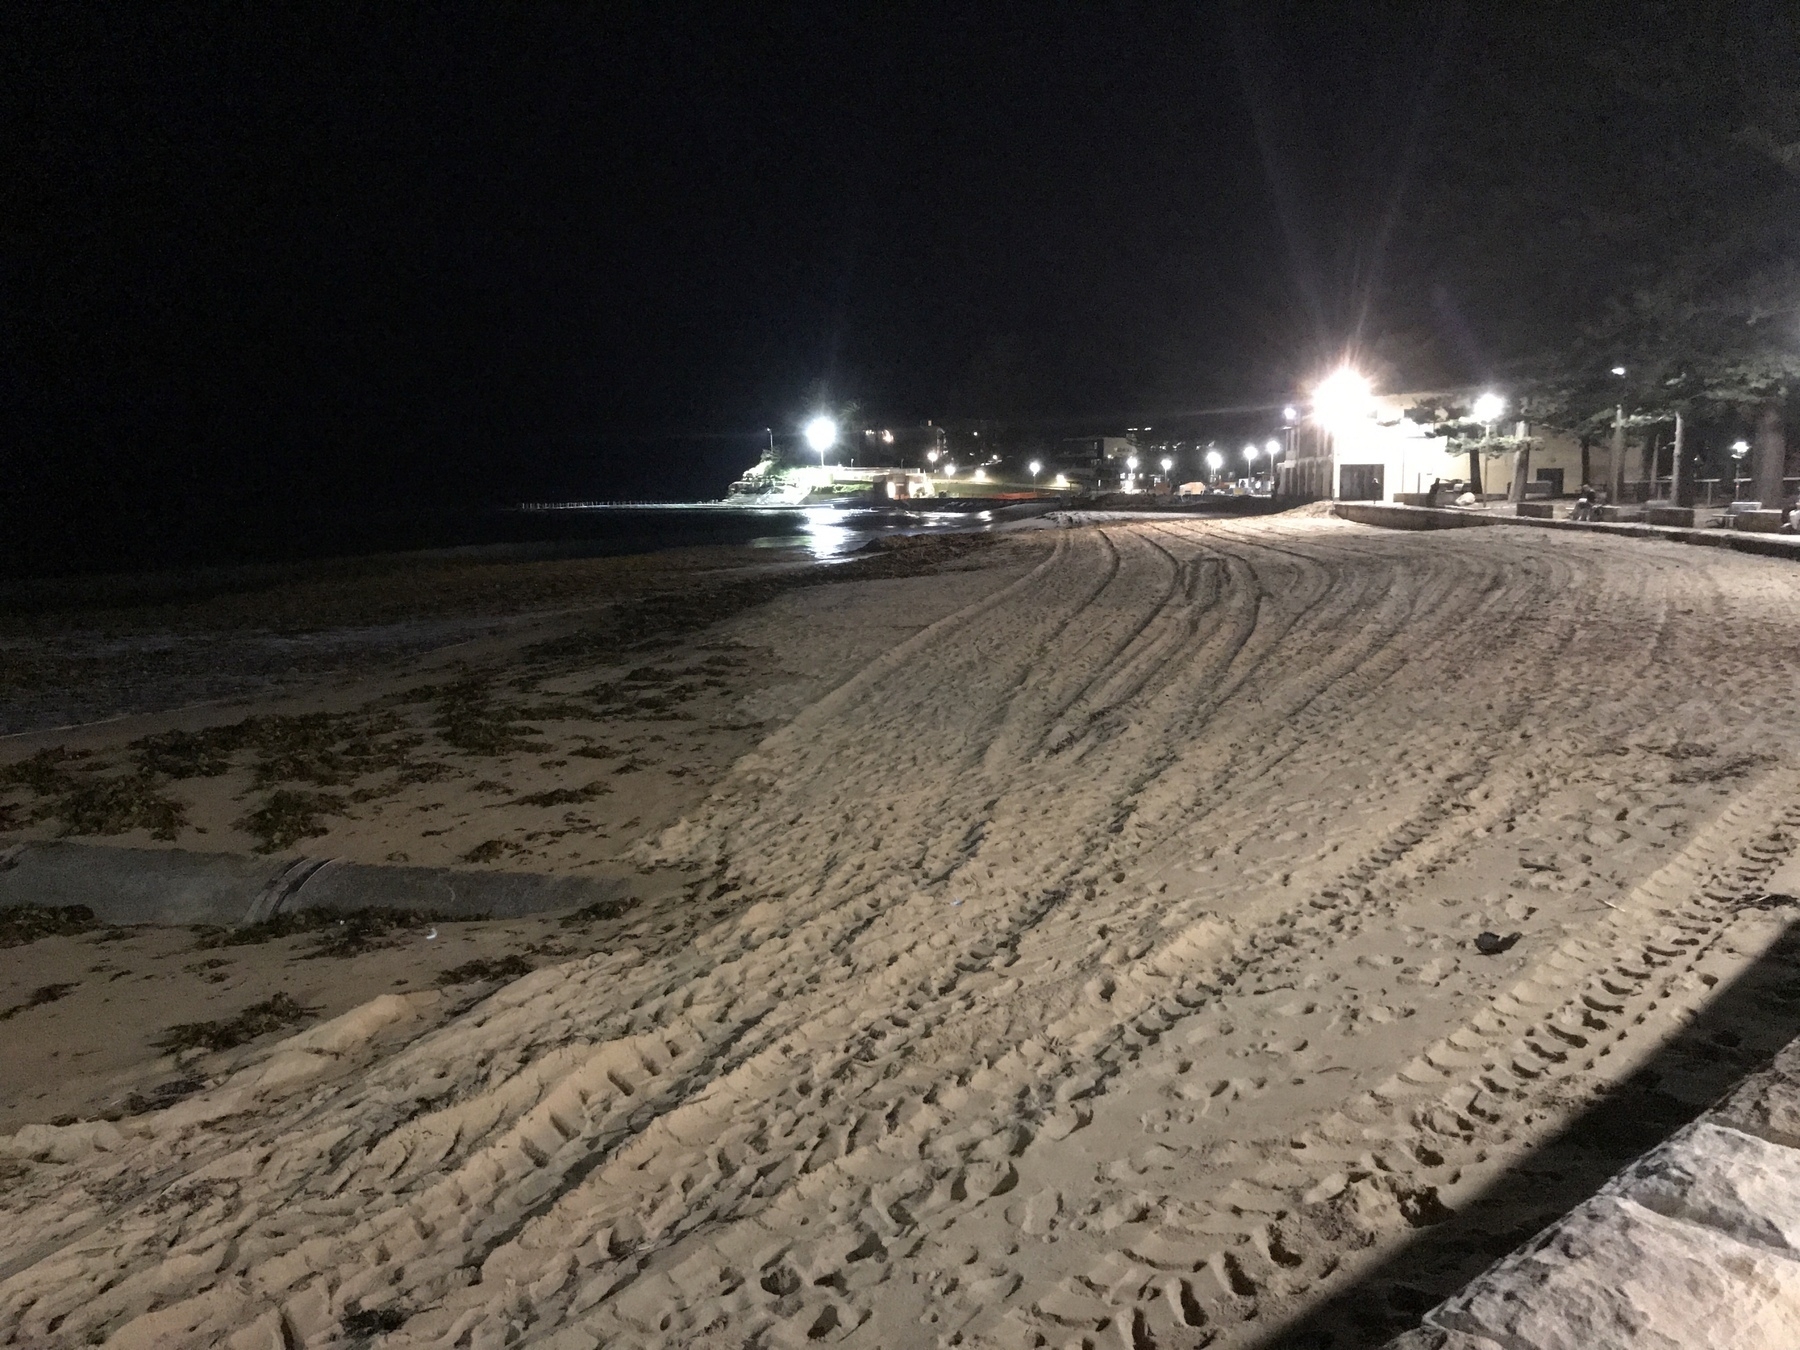 Long stretch if beach at night with lights in the distance